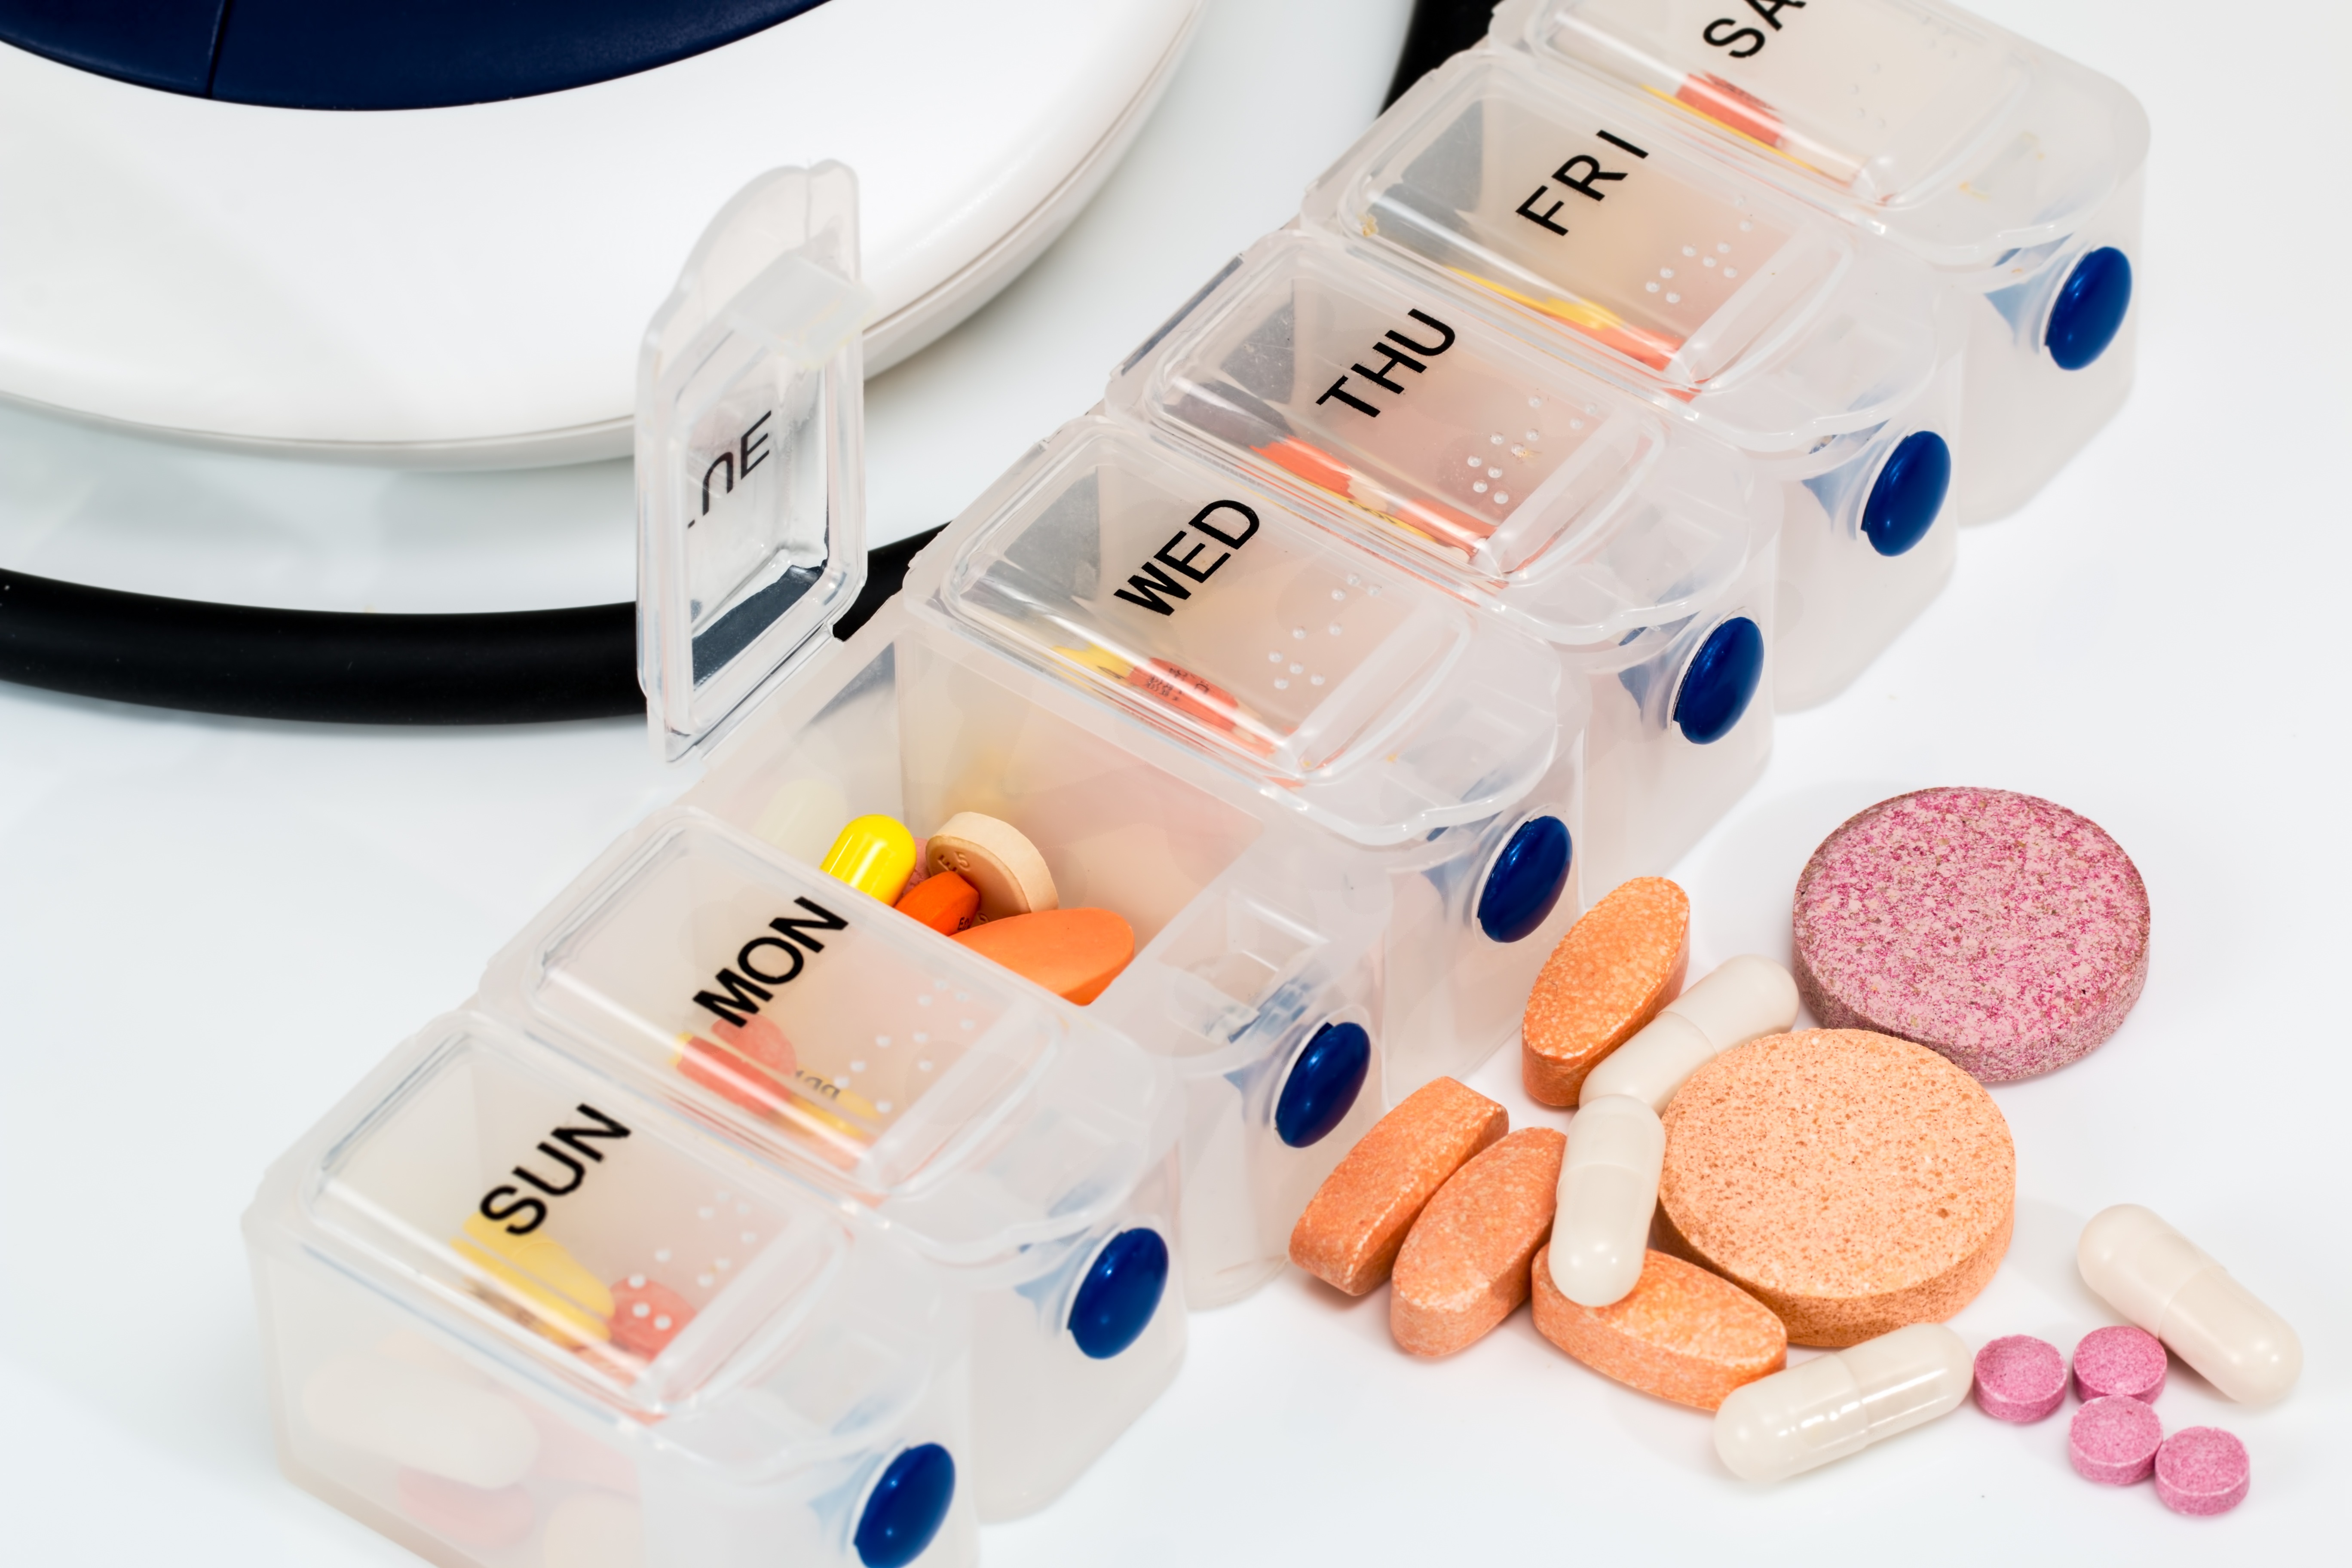 A pill sorter can be a useful tool to prevent double-dosing medication